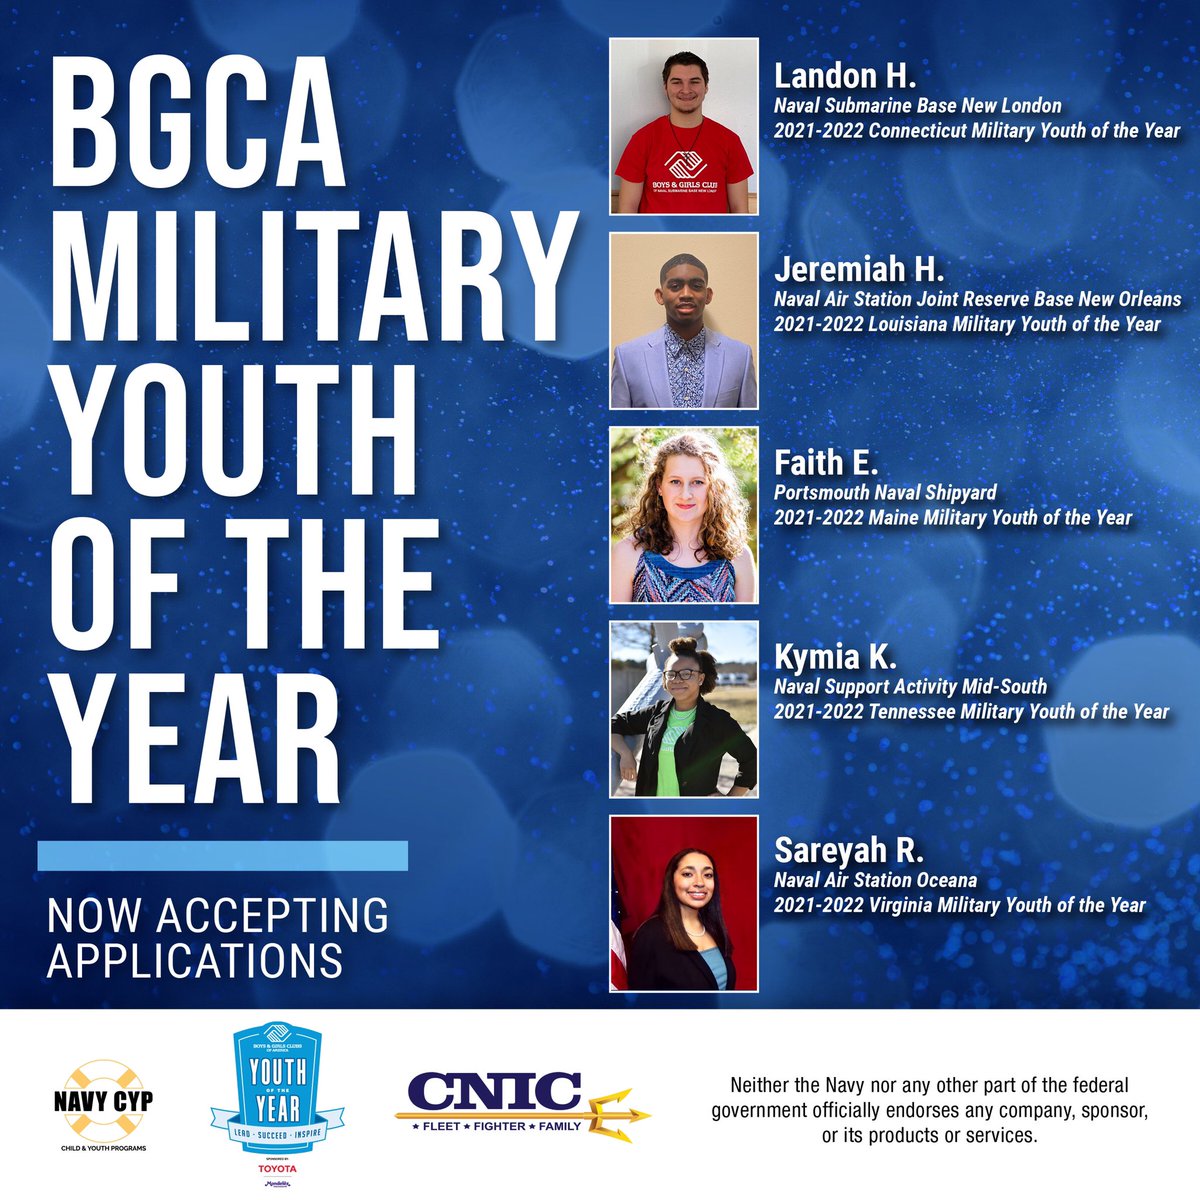 With the start of a new year, means another year of @BGCA_Clubs Military Youth of the Year! MYOYs speak about what matters to them, advocate for their community, interact with celebrities, and receive college scholarships! Contact your Navy Youth Center for details! #MYOY #GoNavy